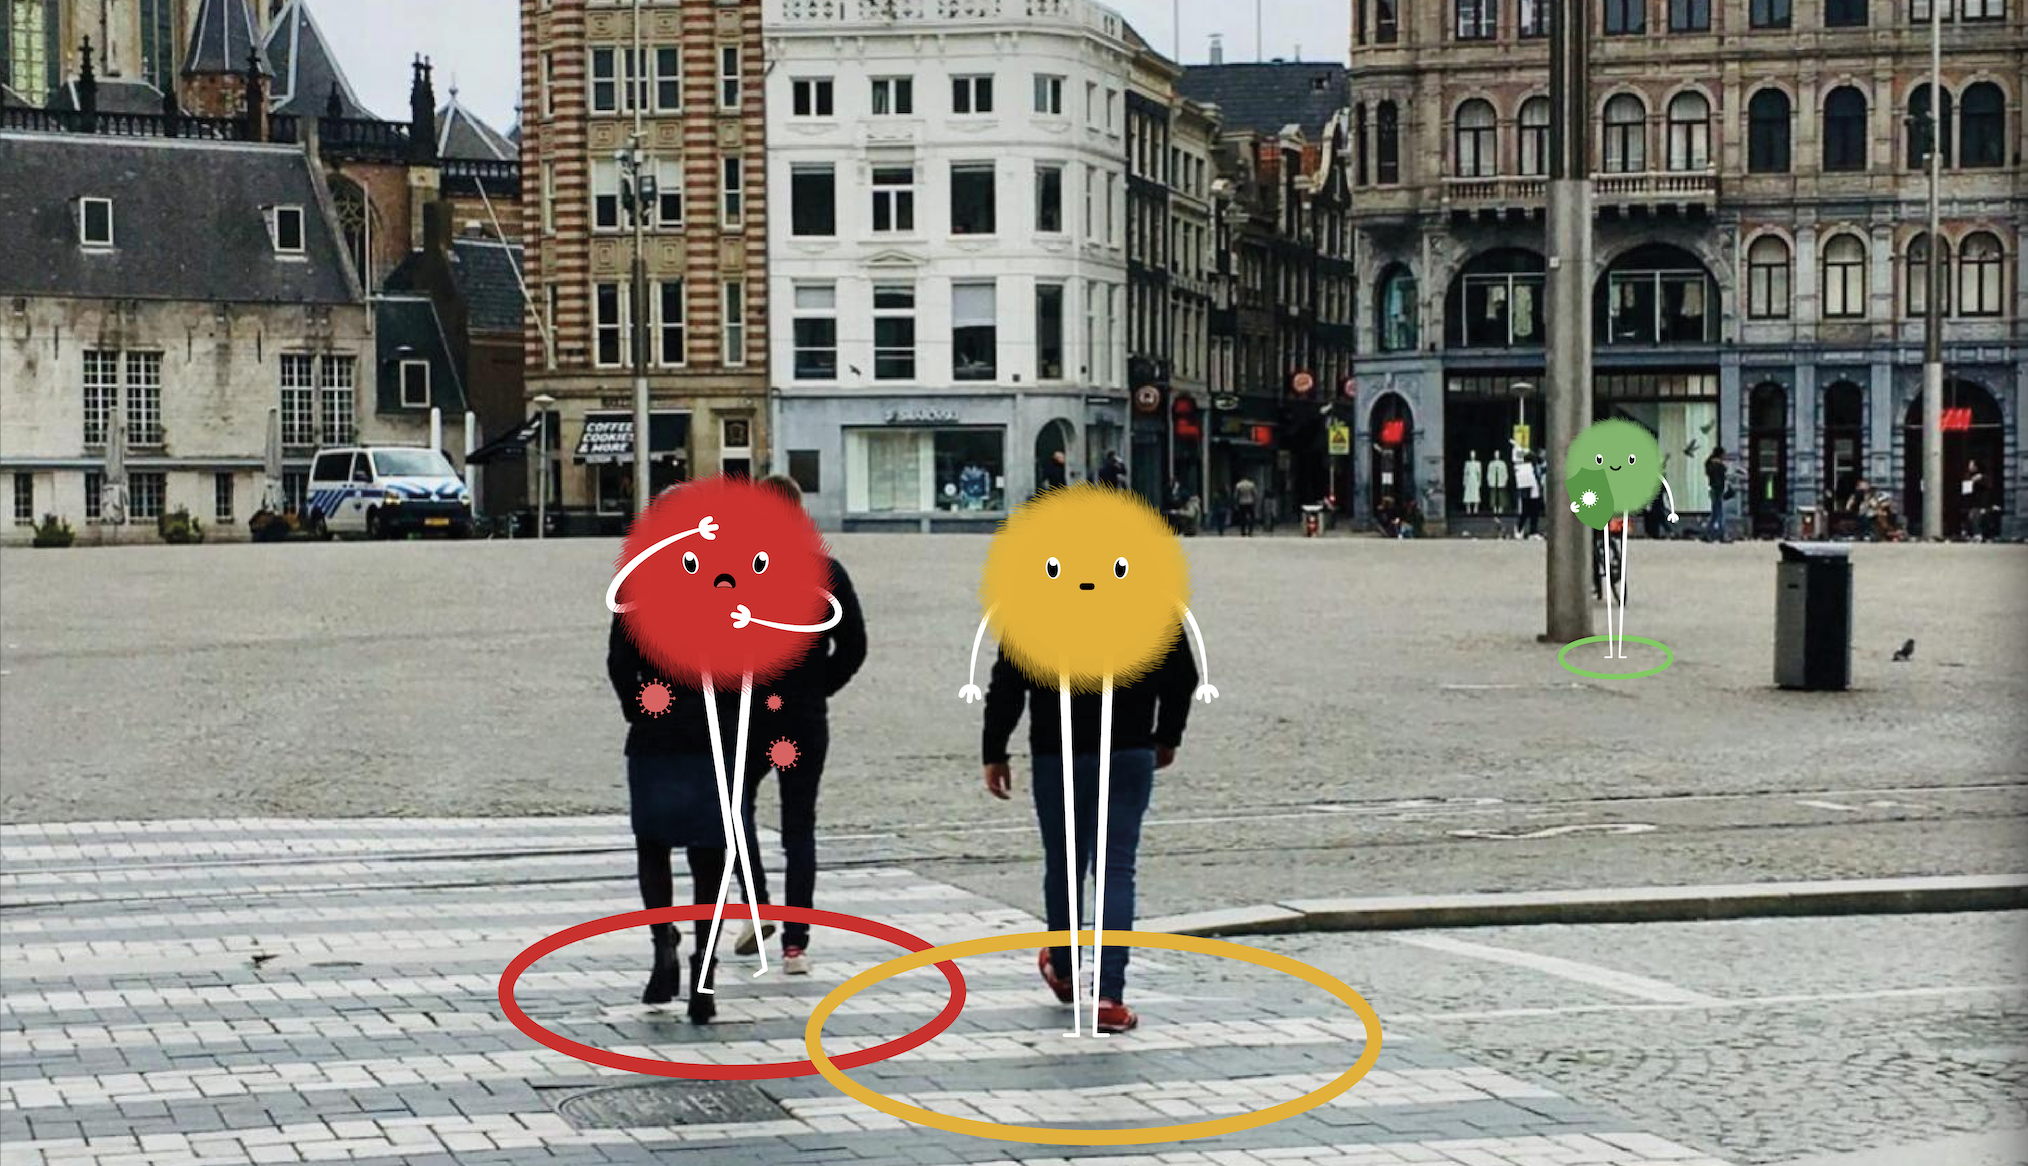 Two people holding umbrellas on a street Description automatically generated with low confidence